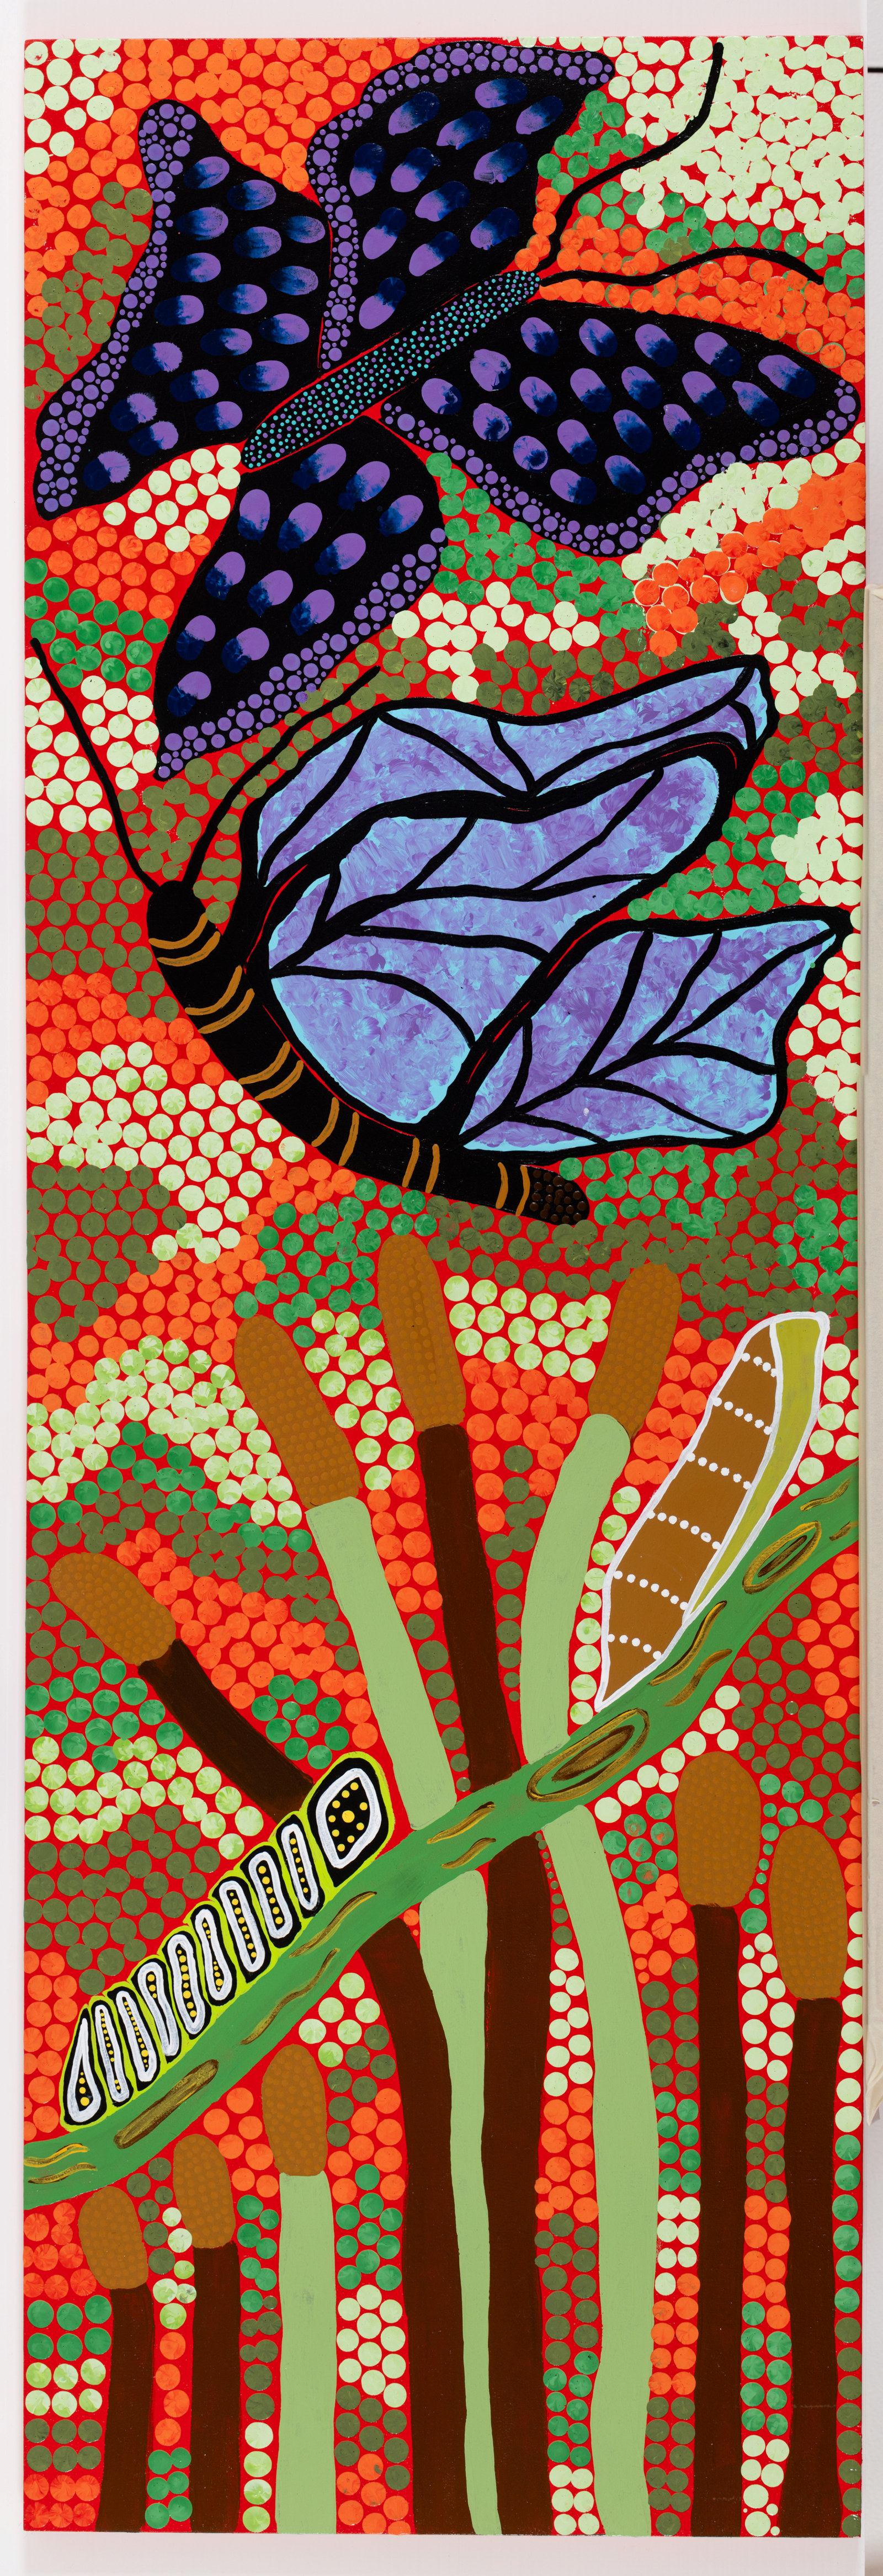 Butterflies of the lagoon, Kristy (Lil) Thomas, Selai Storer and Kanisha Storer, 2022, acrylic on plywood board, 122.5cm x 41cm
Our beautiful butterflies congregate around the lagoon, hiding amongst the cumbungi. Cumbungi has been used for thousands of years and is an excellent source of fibre. 
[The butterflies] are known as the keeper of magic.